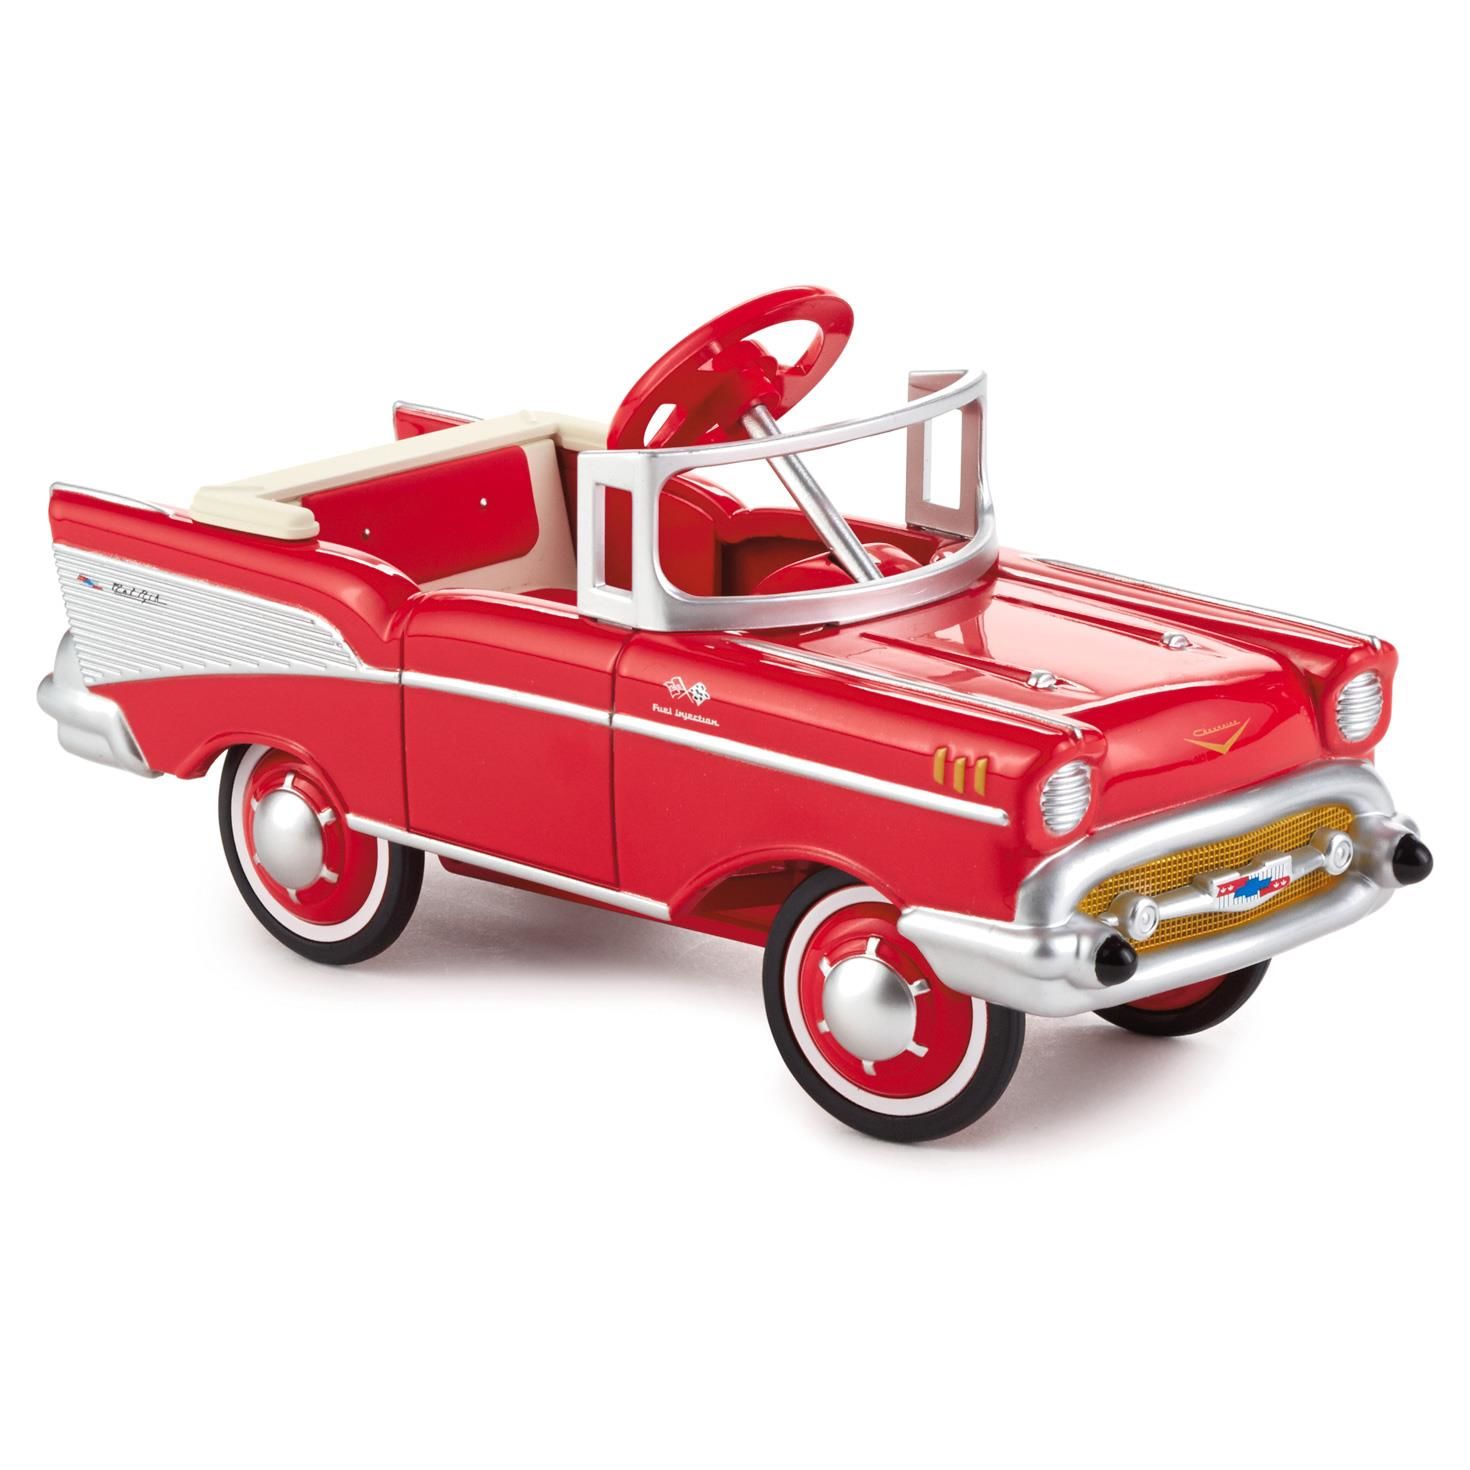 1957 Chevrolet Bel Air Kiddie Car Classics Collectible Toy Car ...